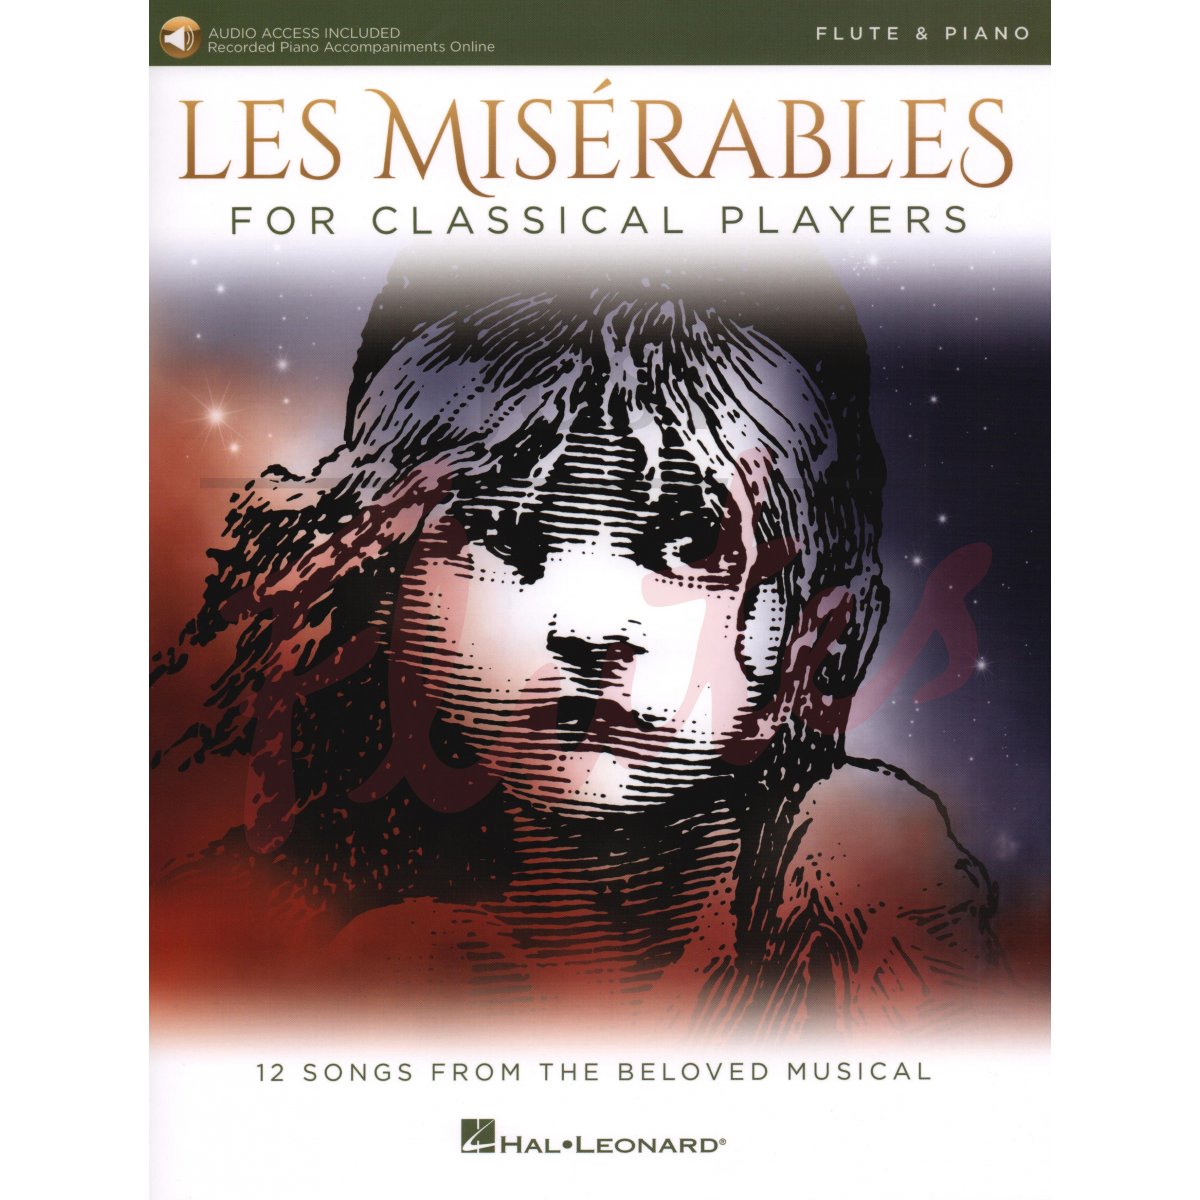 Les Misérables for Classical Players for Flute and Piano